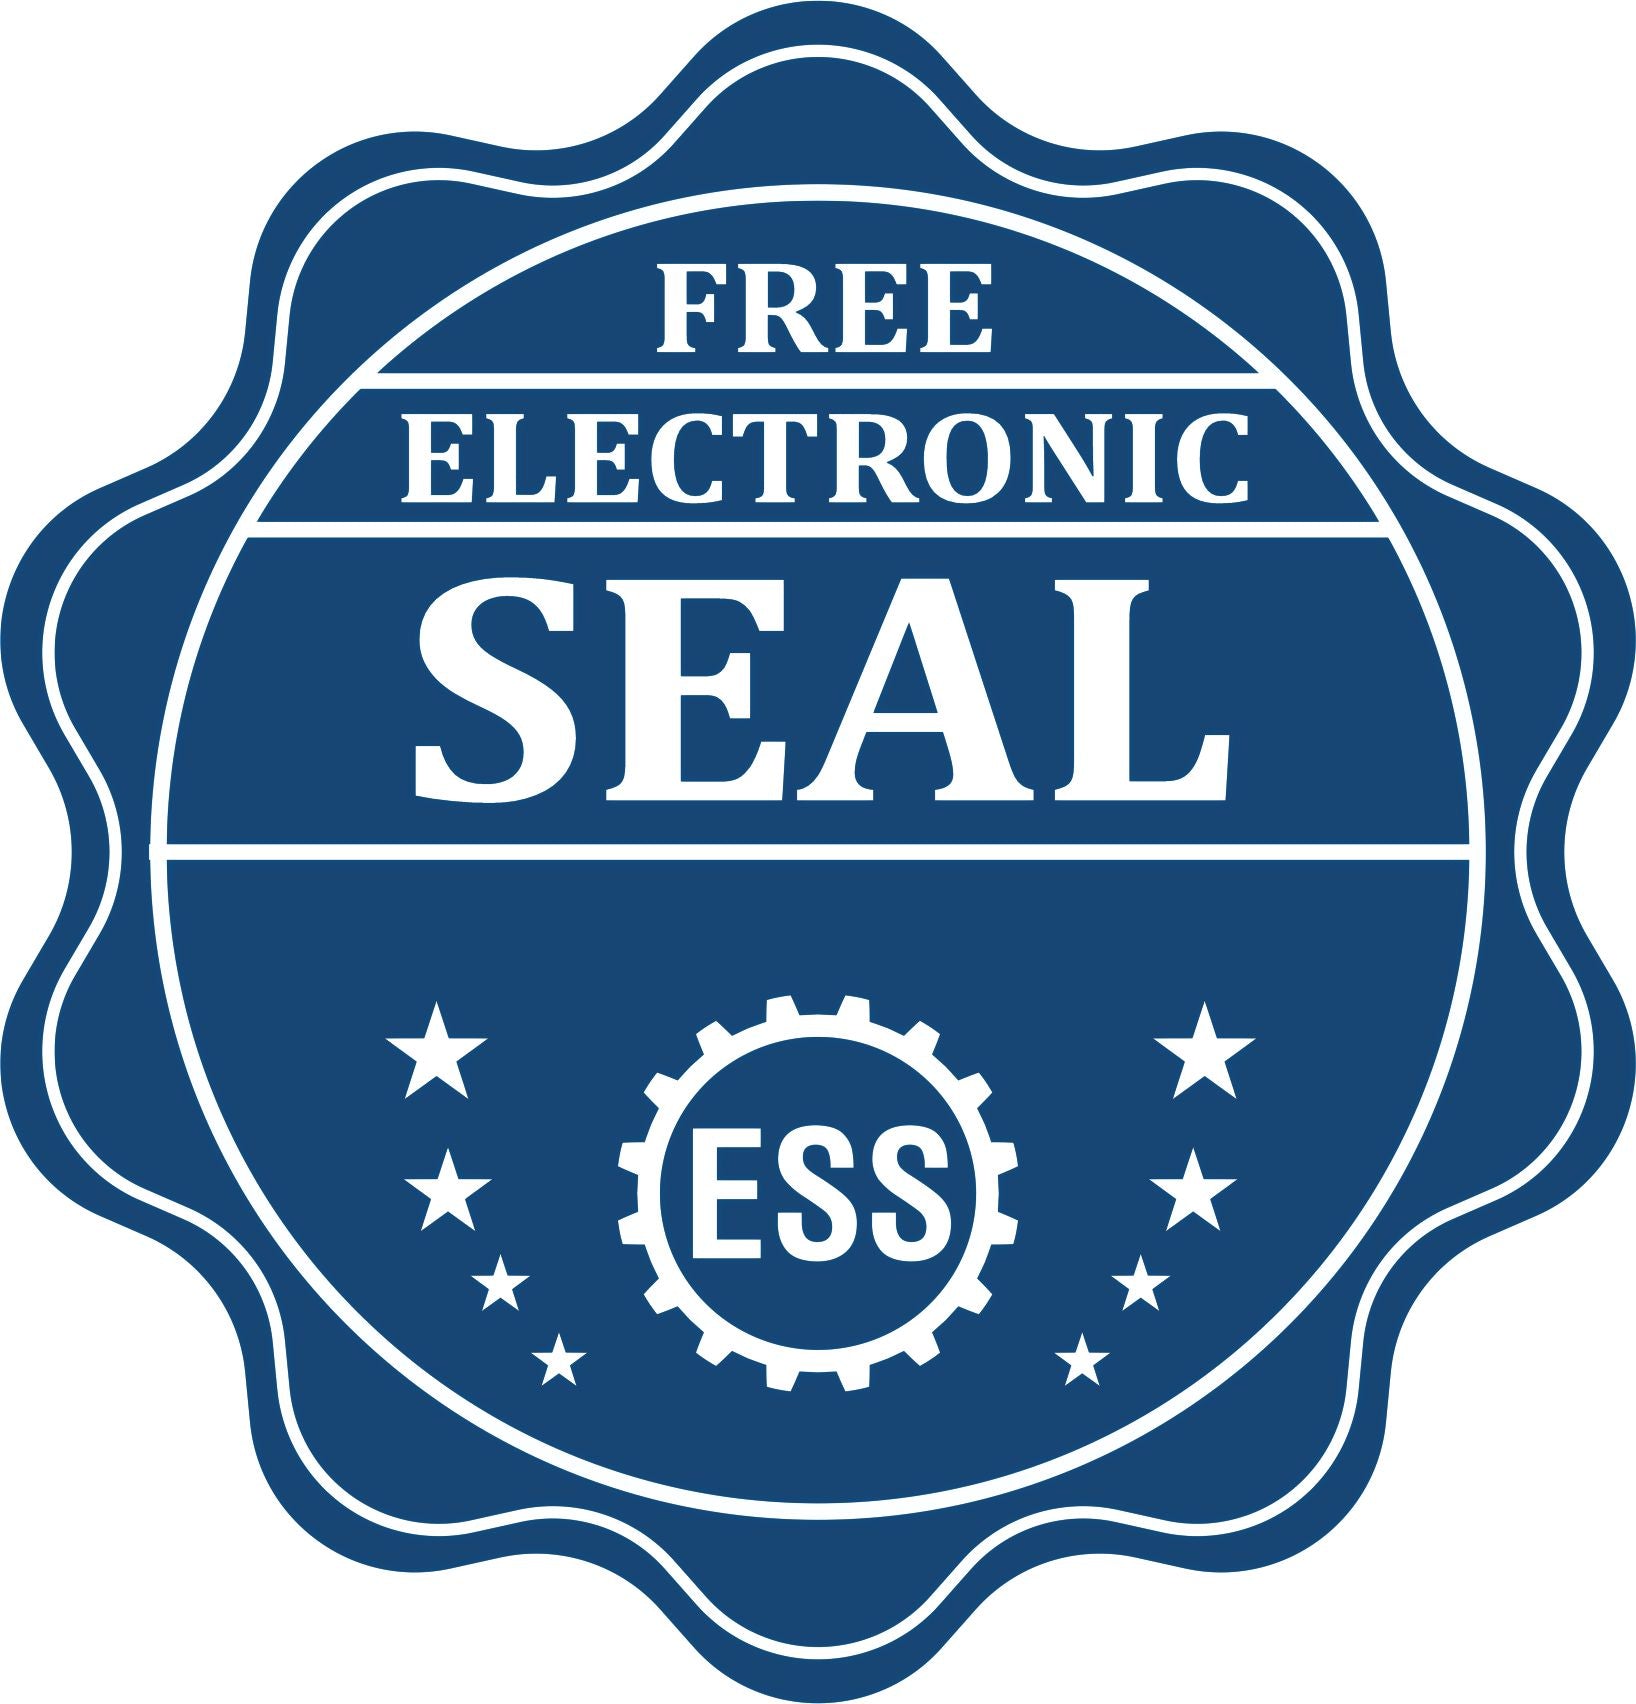 A badge showing a free electronic seal for the State of South Carolina Extended Long Reach Engineer Seal with stars and the ESS gear on the emblem.